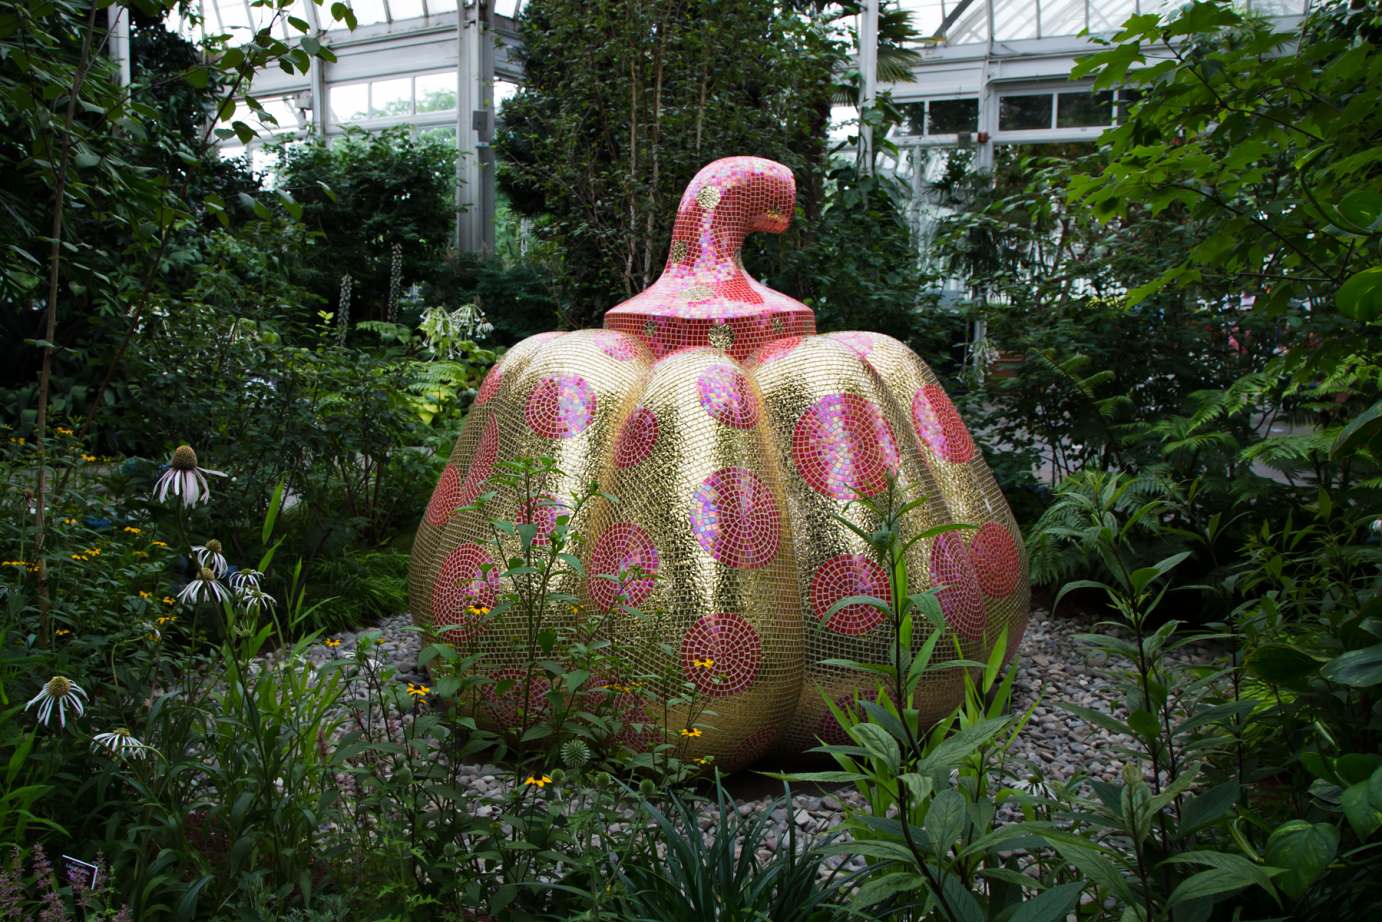 a whimsical and elegant large pumpking sculpture colored with  shiny gold and pink tiles sits amdist echineca flowers and greens in New Yorks Botanical Garden